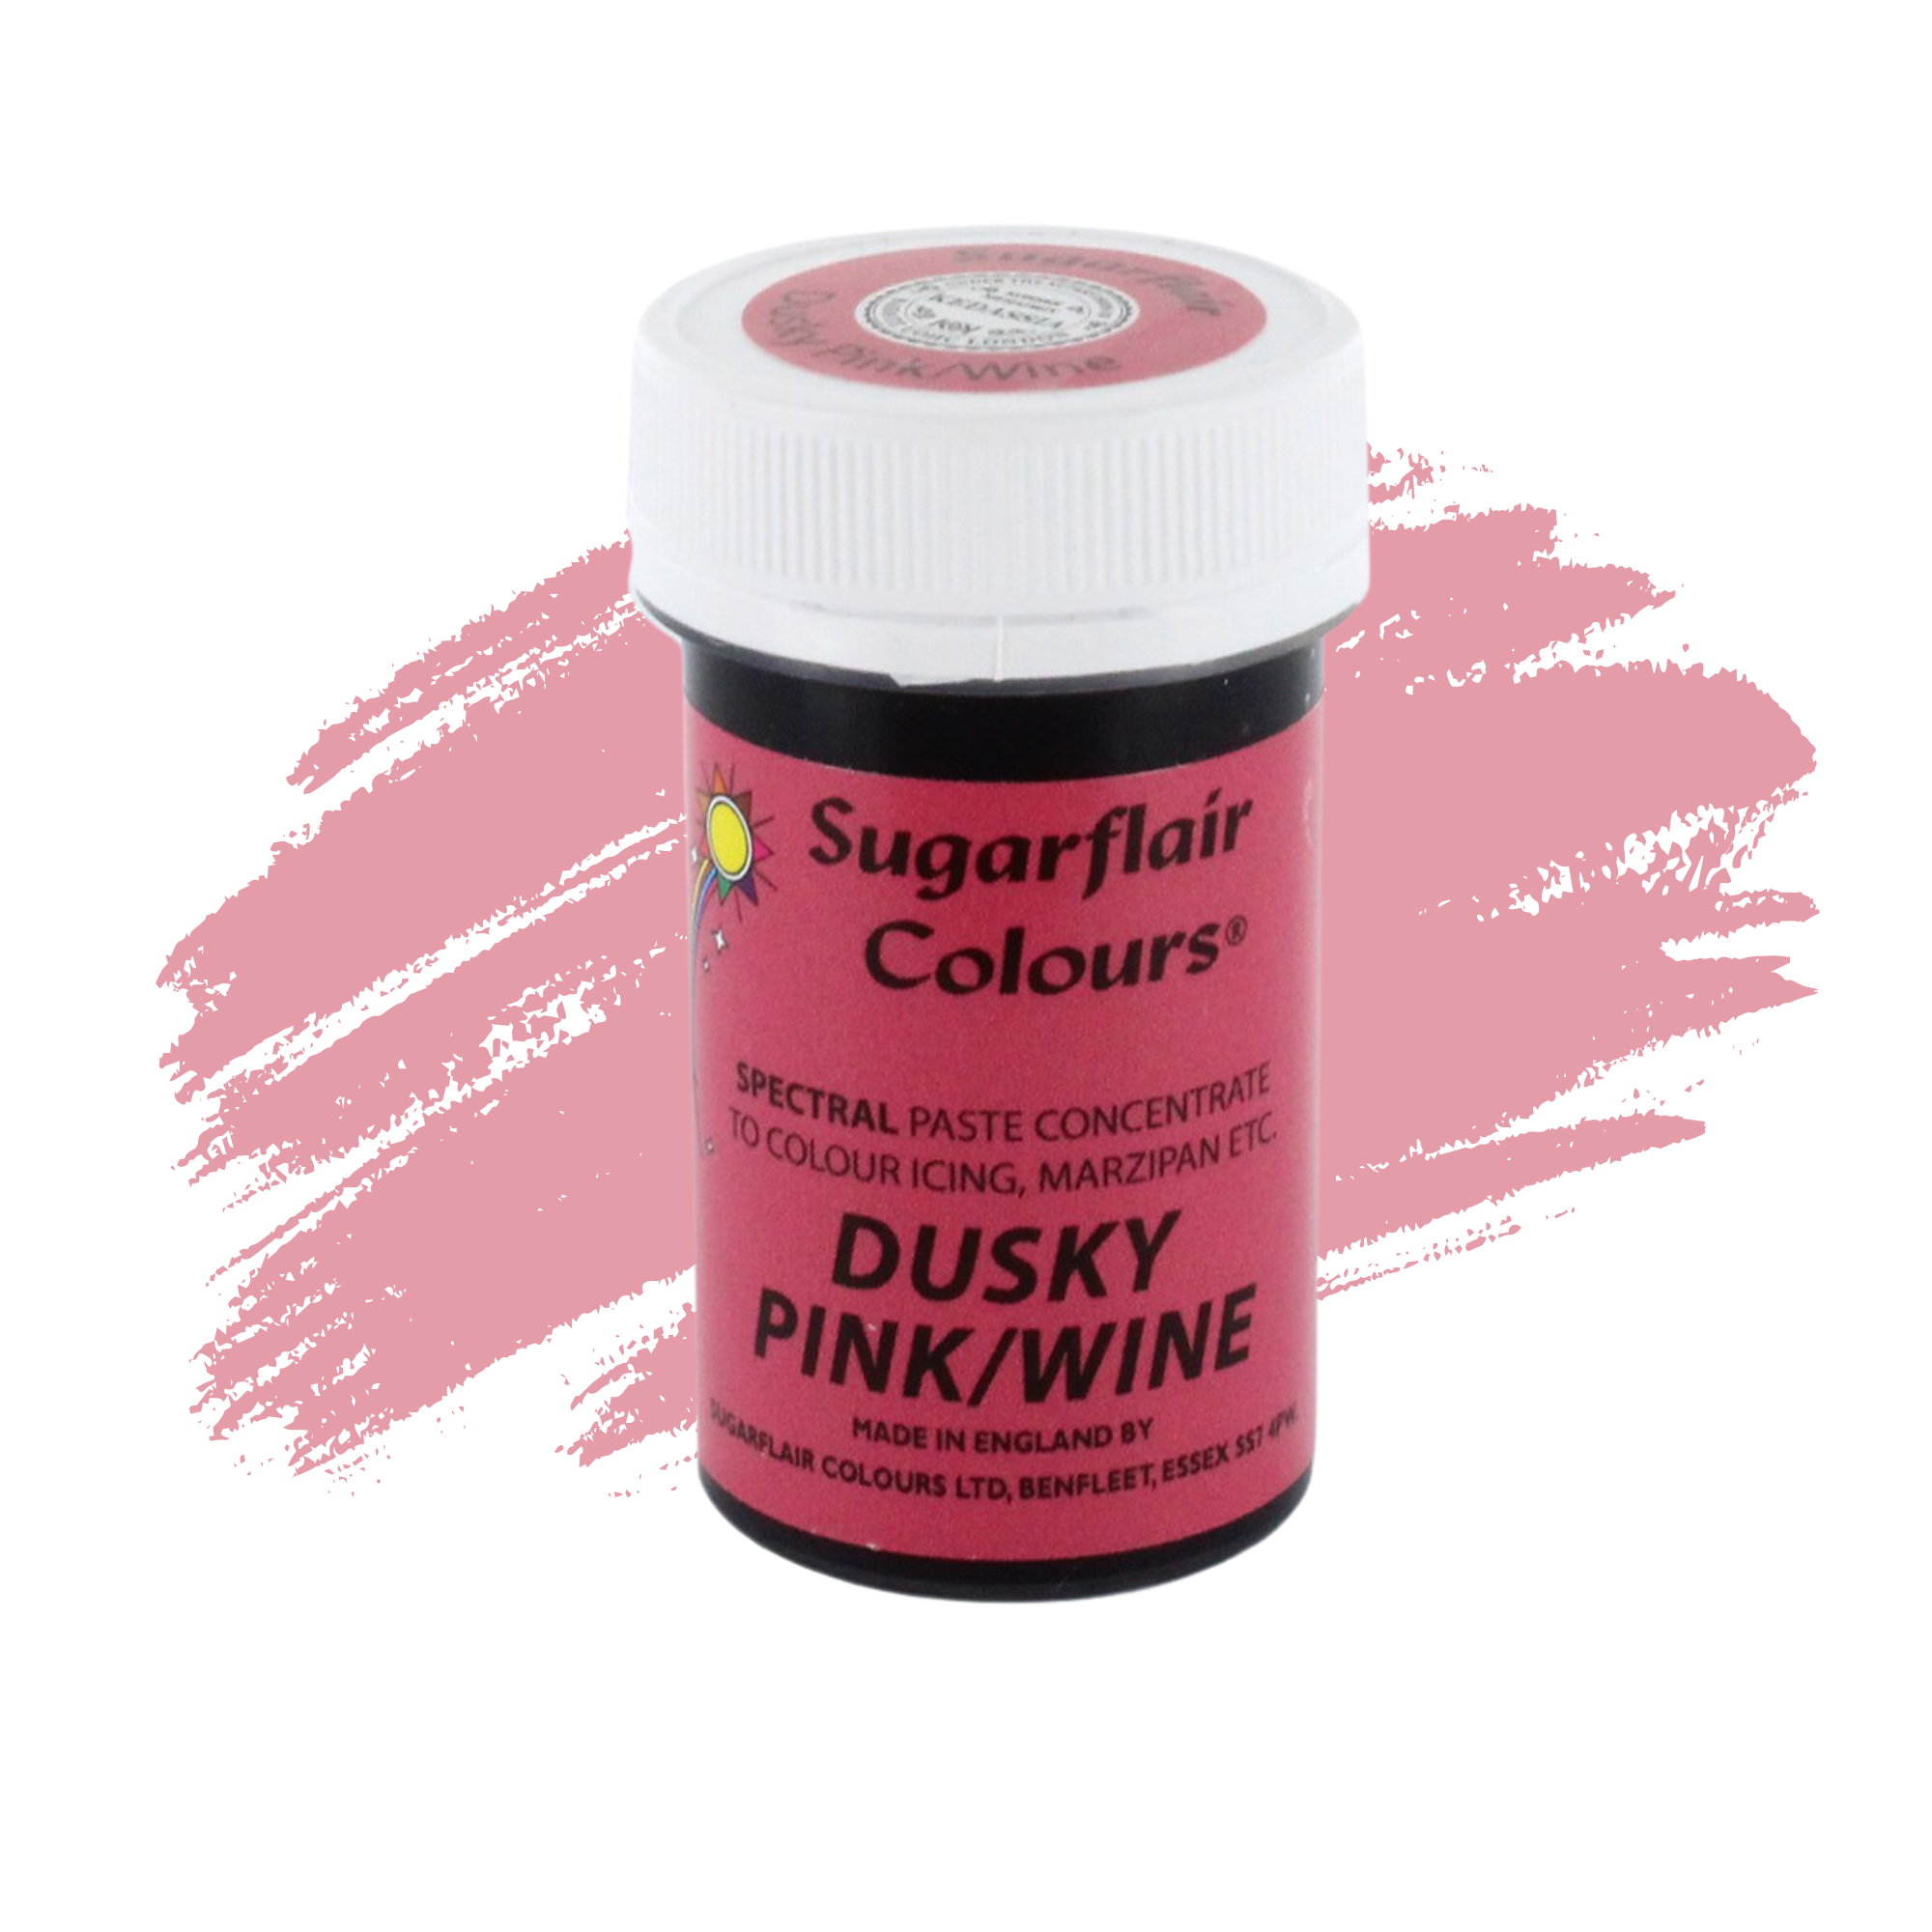 Sugarflair Paste Colours Concentrated Food Colouring - Spectral Dusky Pink / Wine - 25g